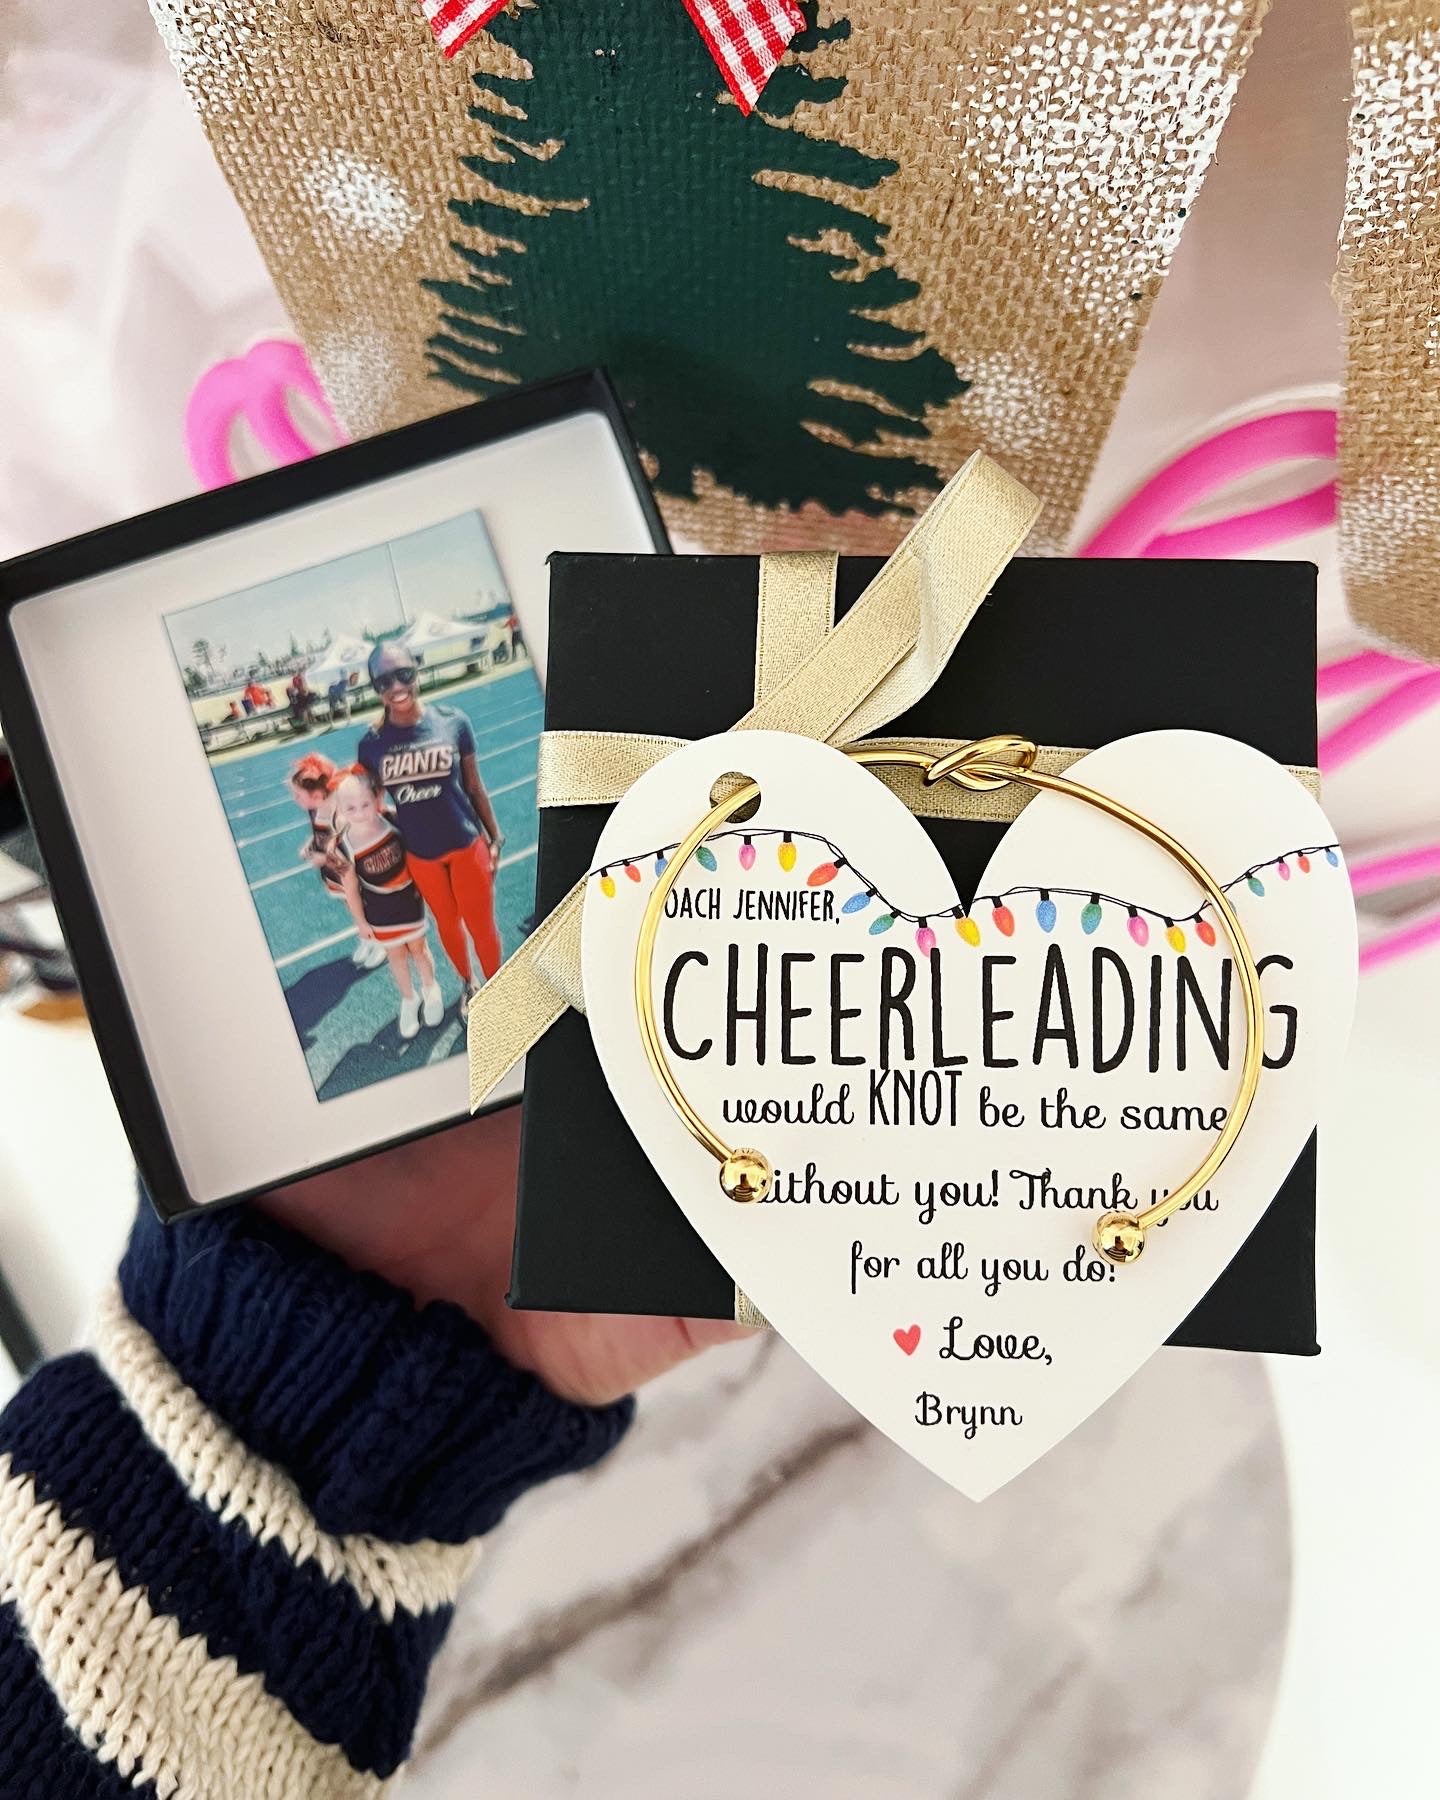 Printed Picture + Knot bangle Sports Coach Holiday Thank you gift! Cheer Coach, Swim, Gym teacher, photo included with box and ribbon!